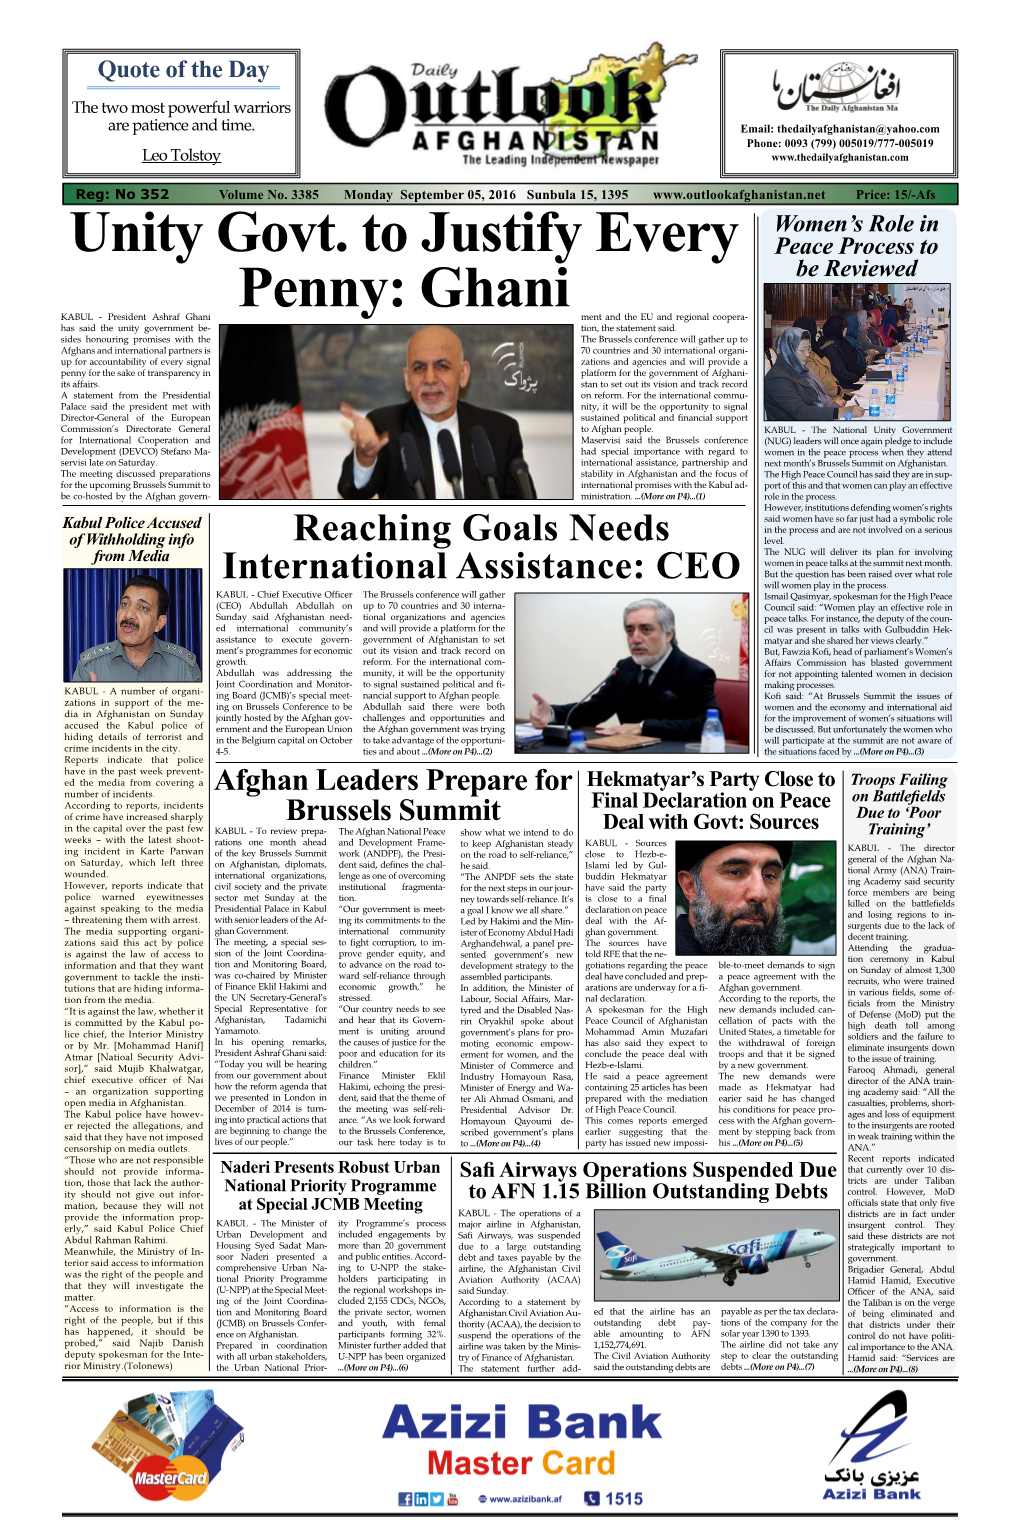 Unity Govt. to Justify Every Penny: Ghani